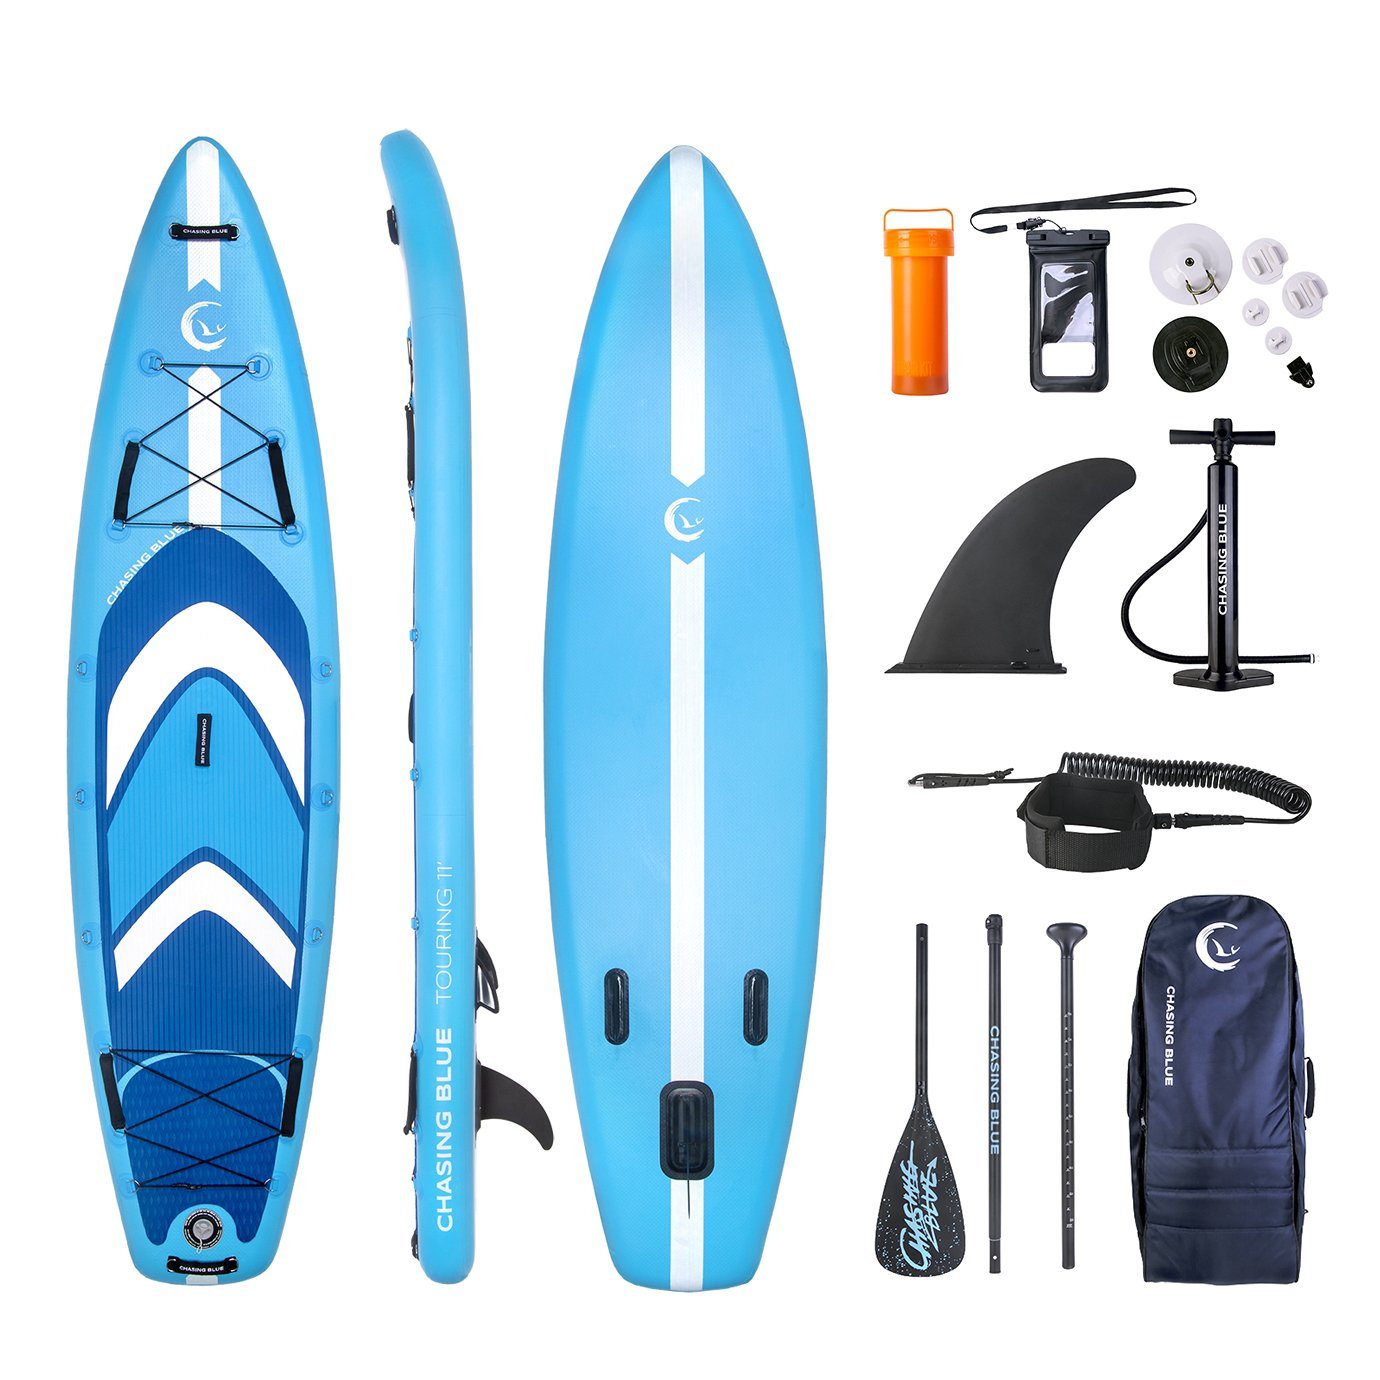 ACE - SPORT iSUP BOARD OutdoorMaster 